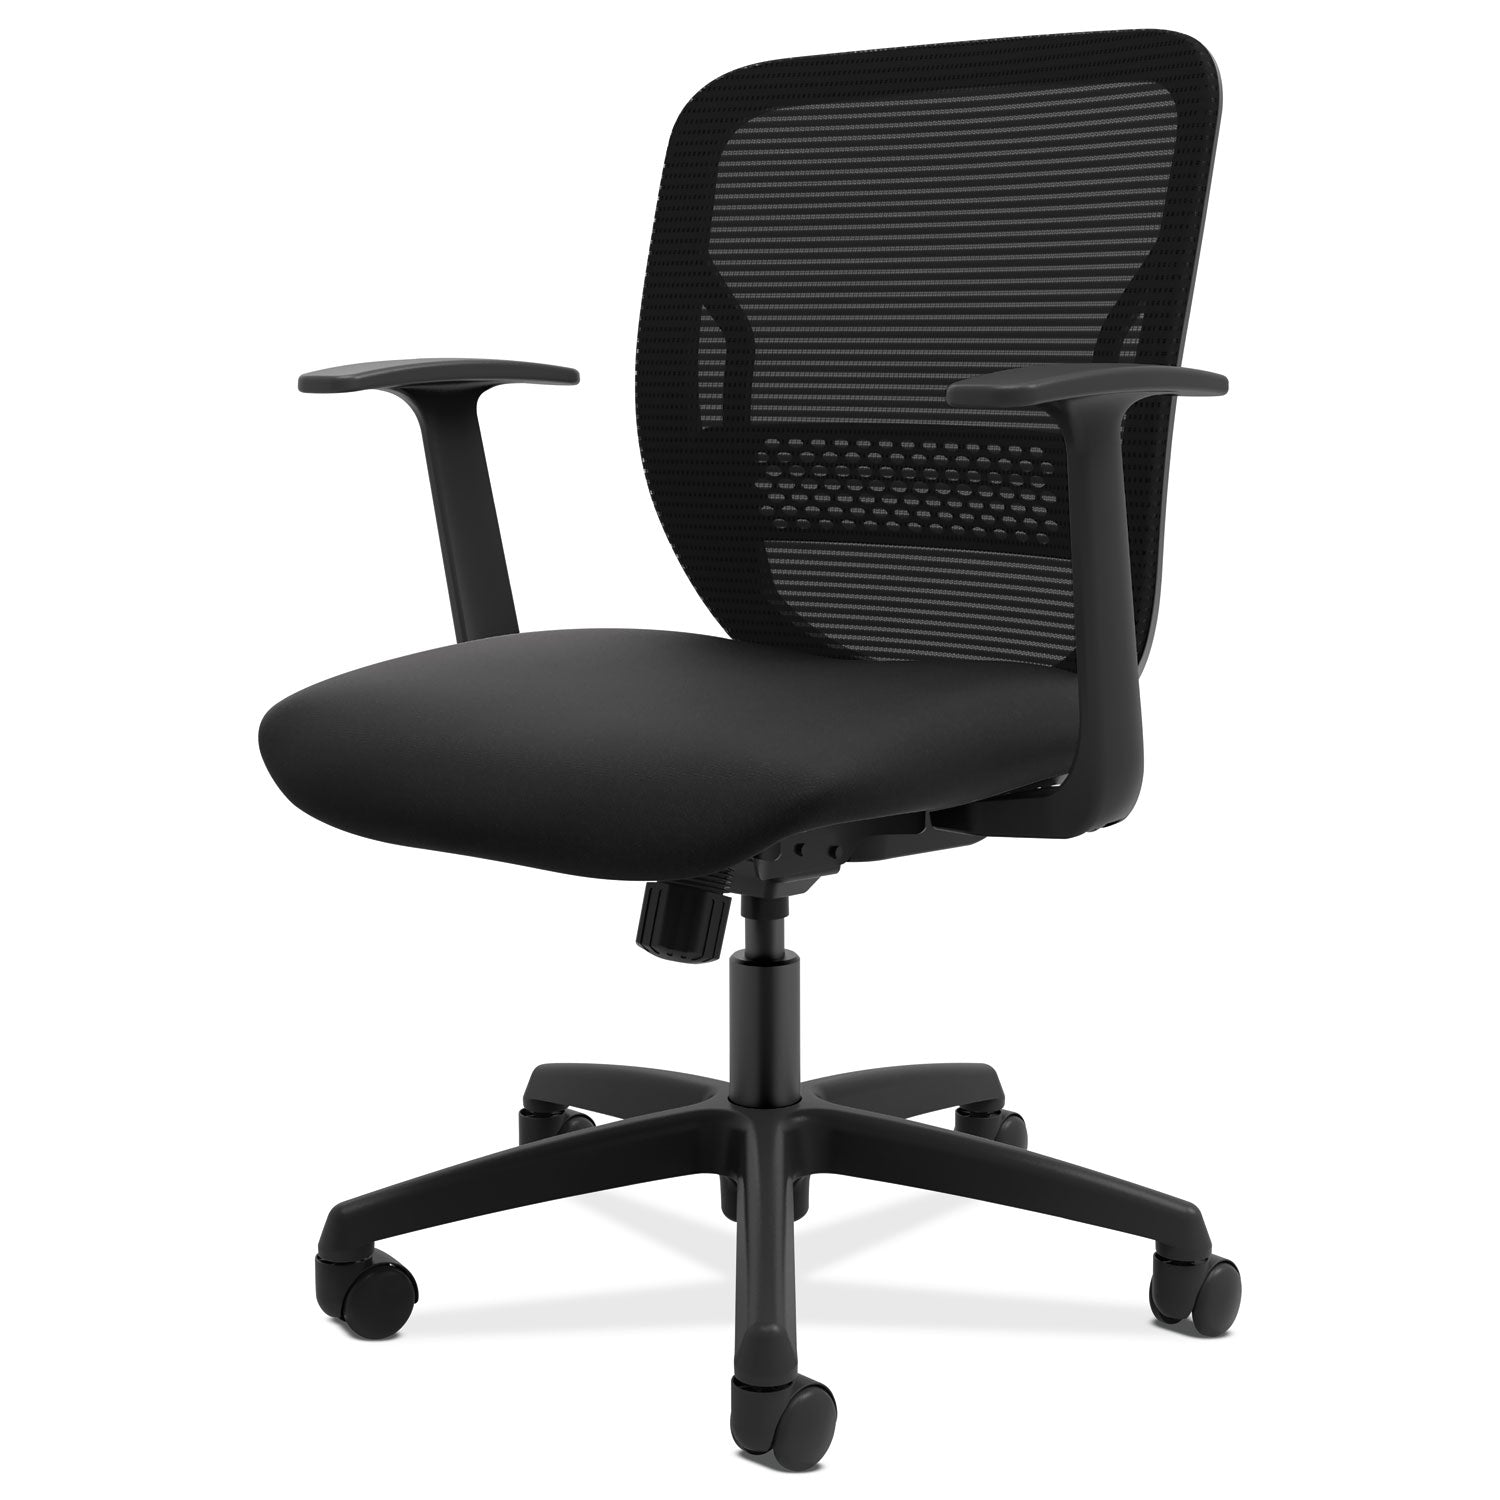 gateway-mid-back-task-chair-supports-up-to-250-lb-17-to-22-seat-height-black_hongvfmz1accf10 - 1